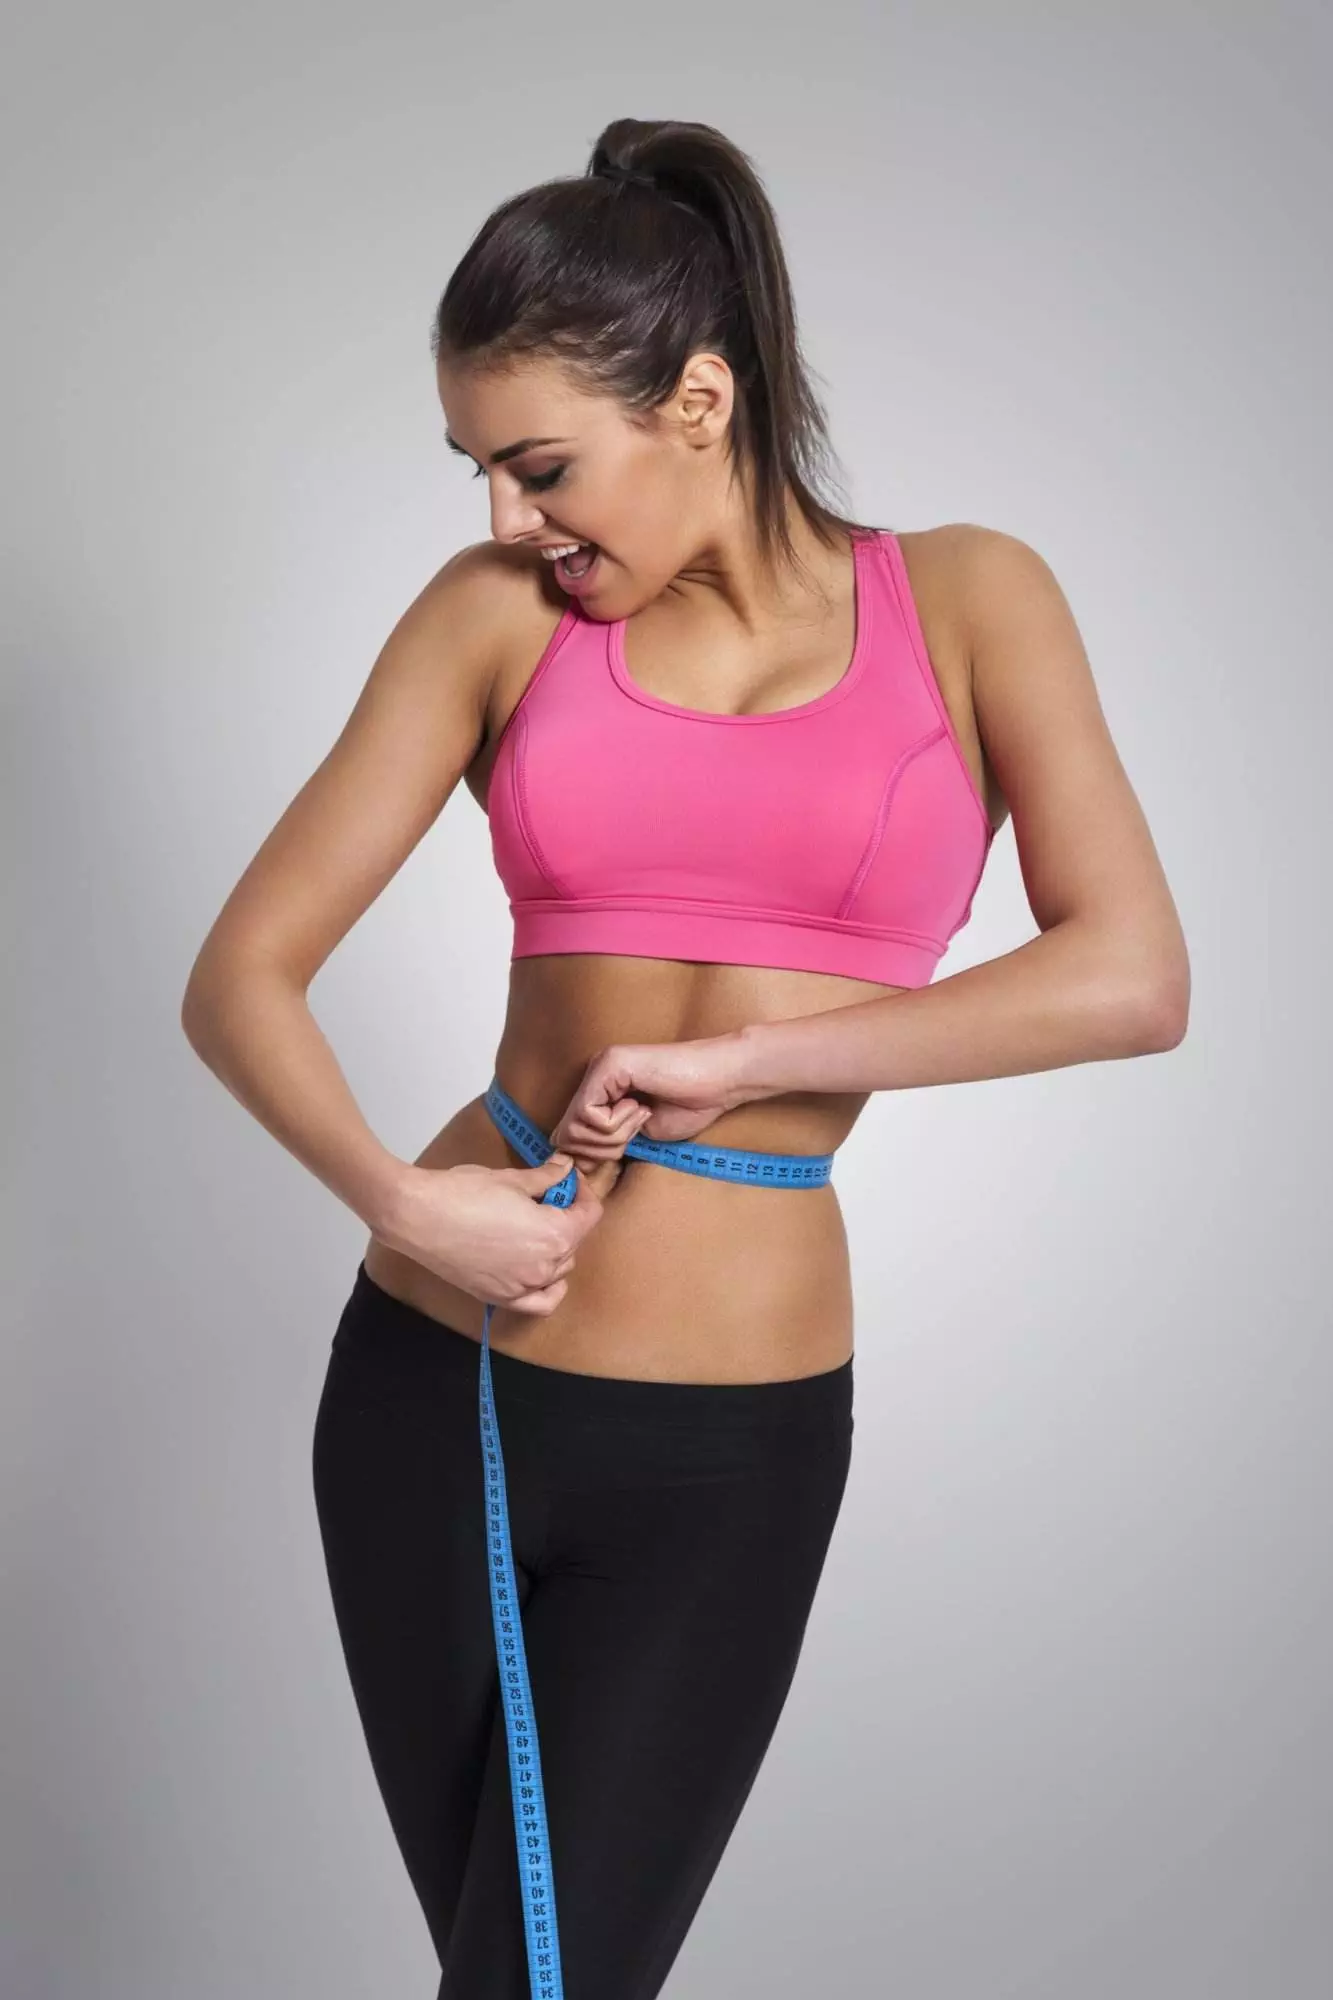 Fit woman with measuring tape around waist